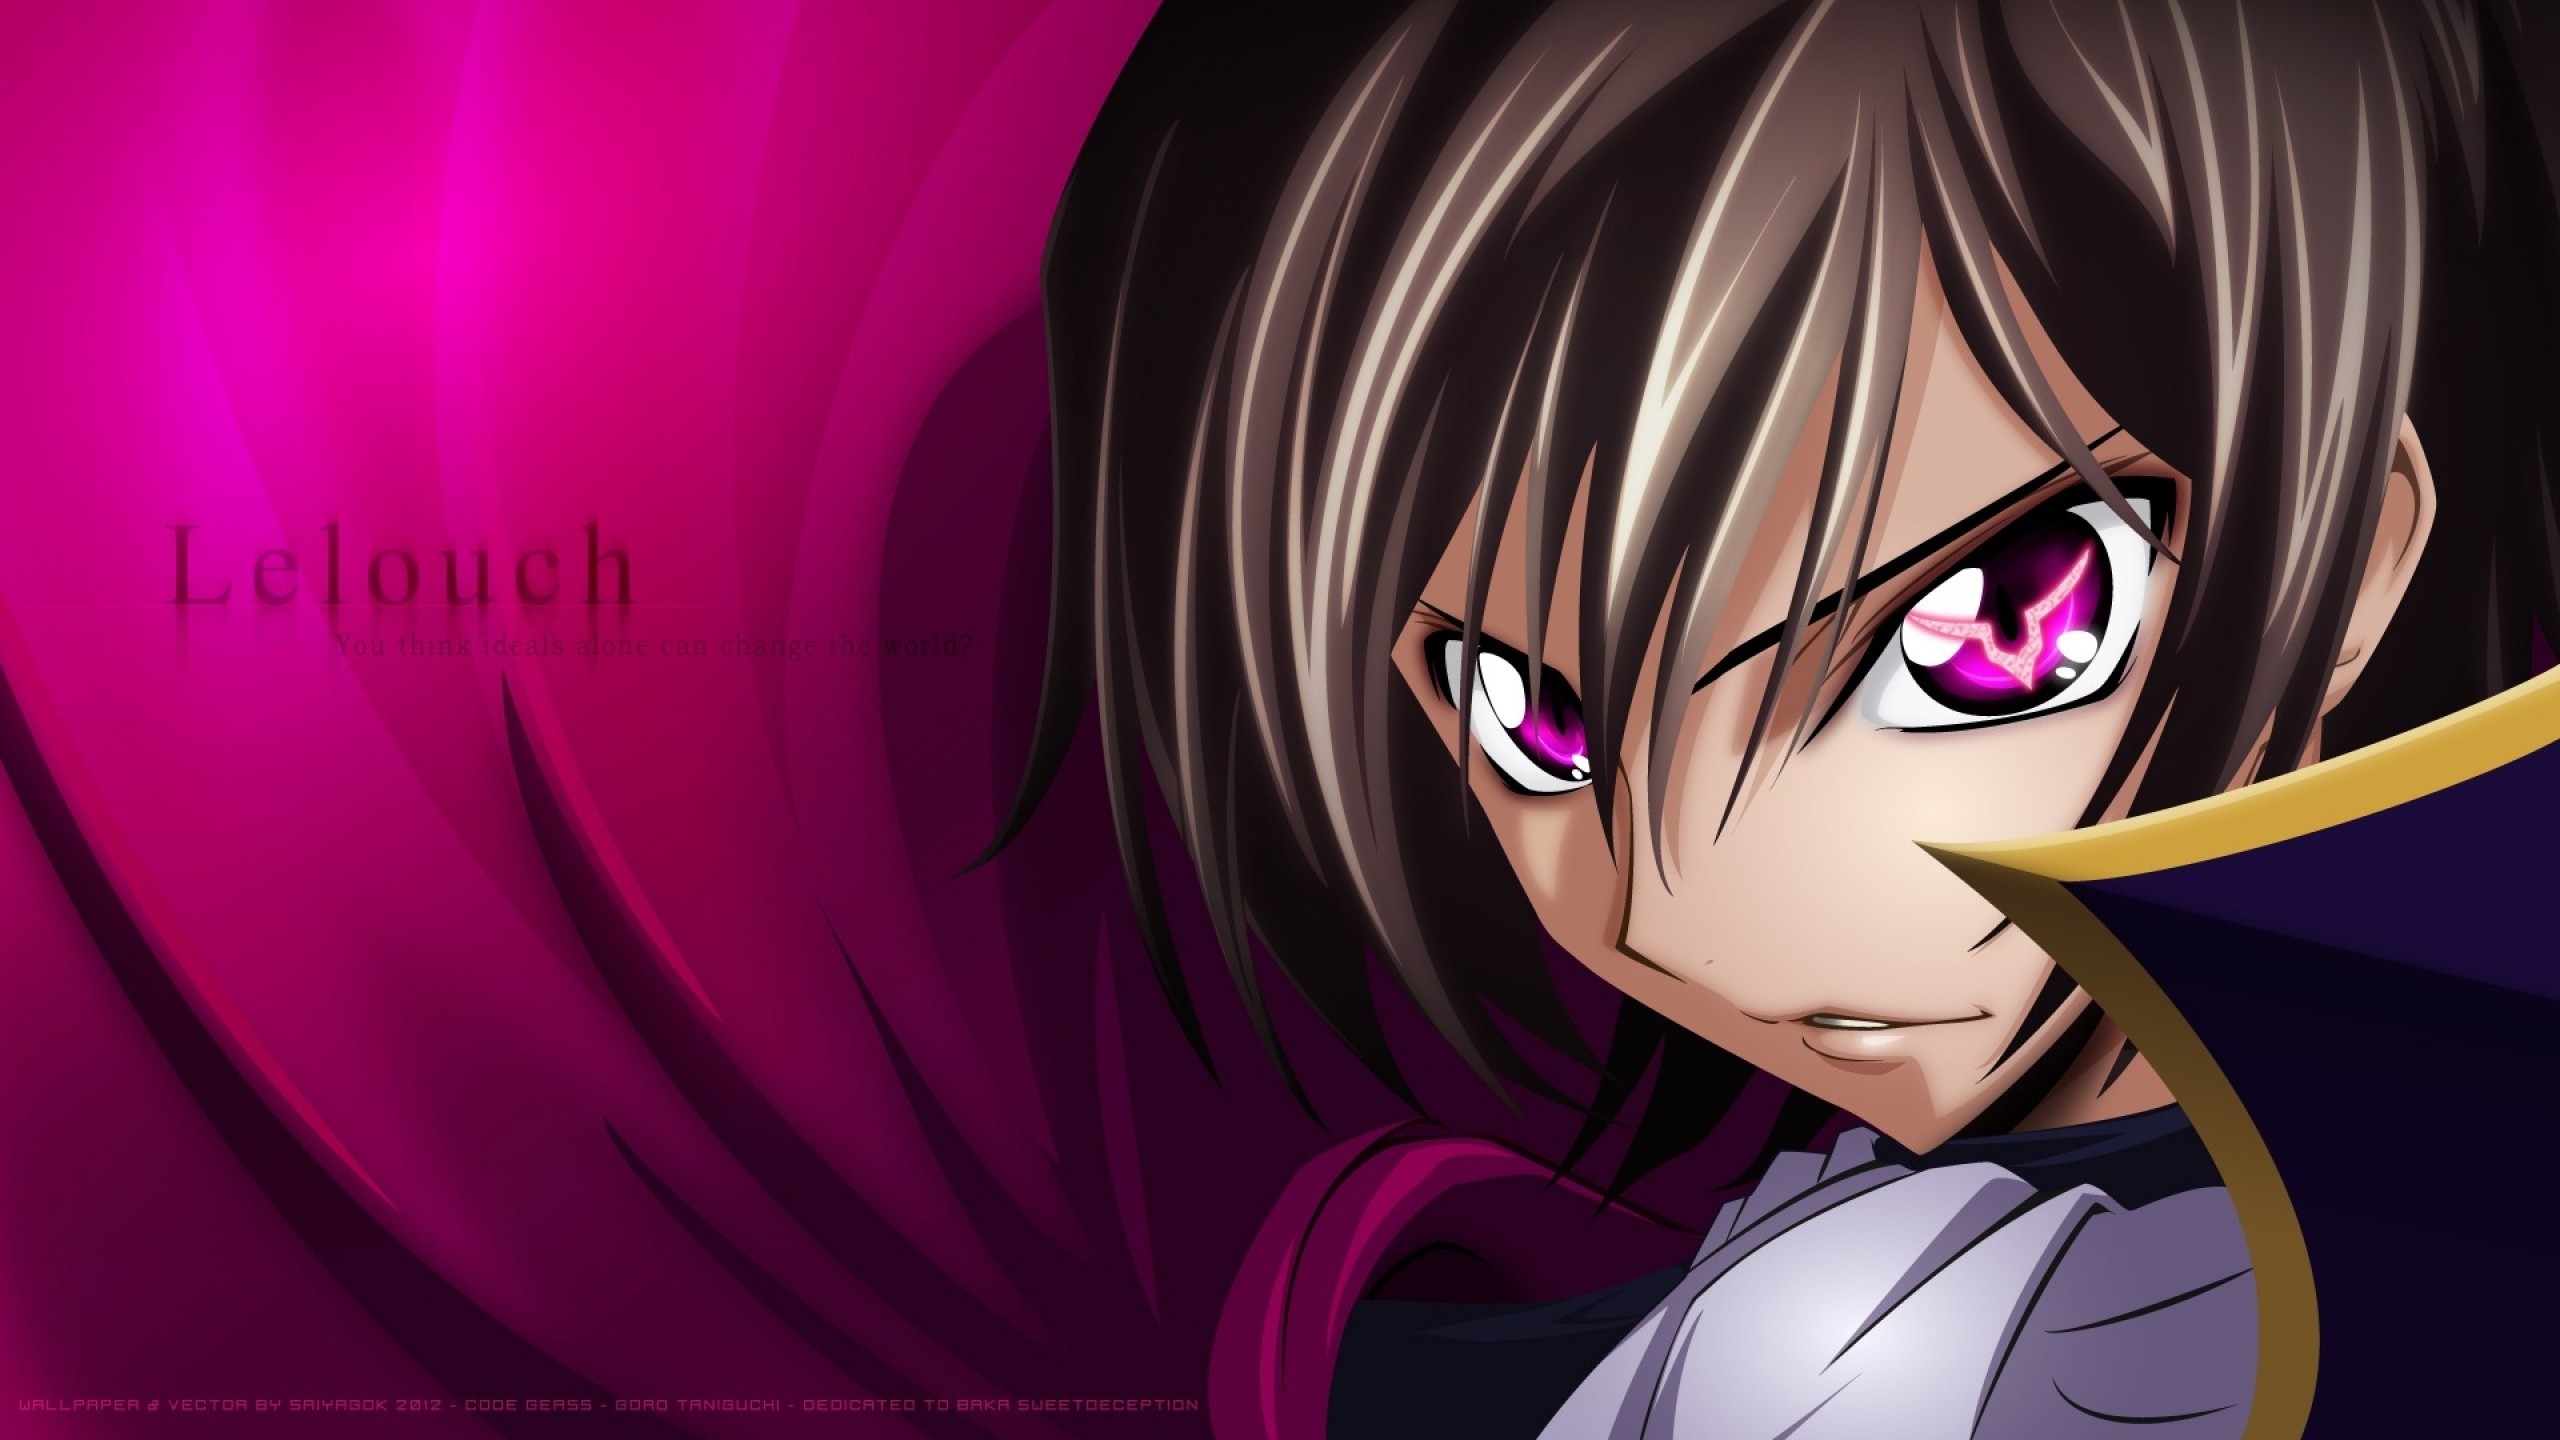 2560x1440 Code Geass Lelouch Lamperouge Anime 1440p Resolution Wallpaper Hd Anime 4k Wallpapers Images Photos And Background Wallpapers Den